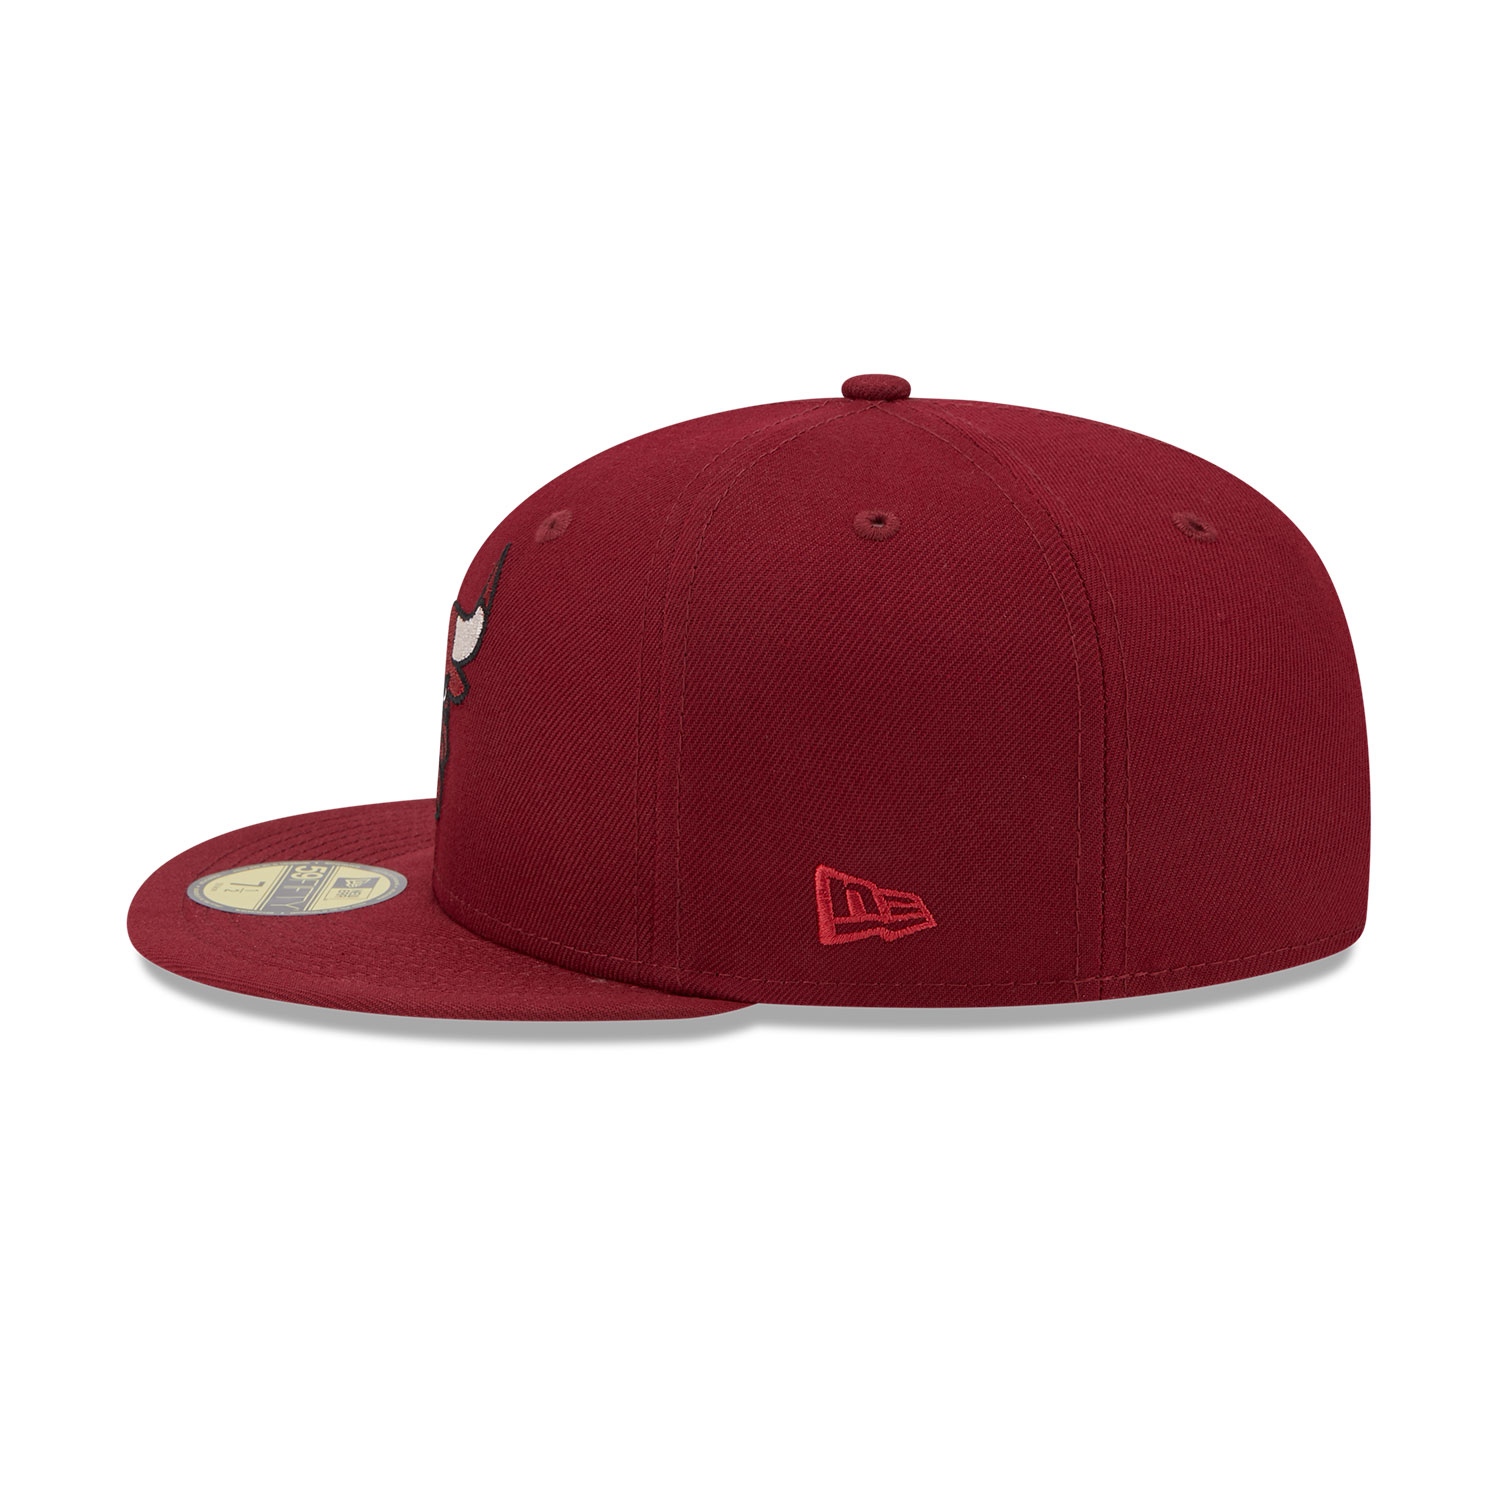 Chicago Bulls Twilight Fantasy Dark Red 59FIFTY Fitted Cap